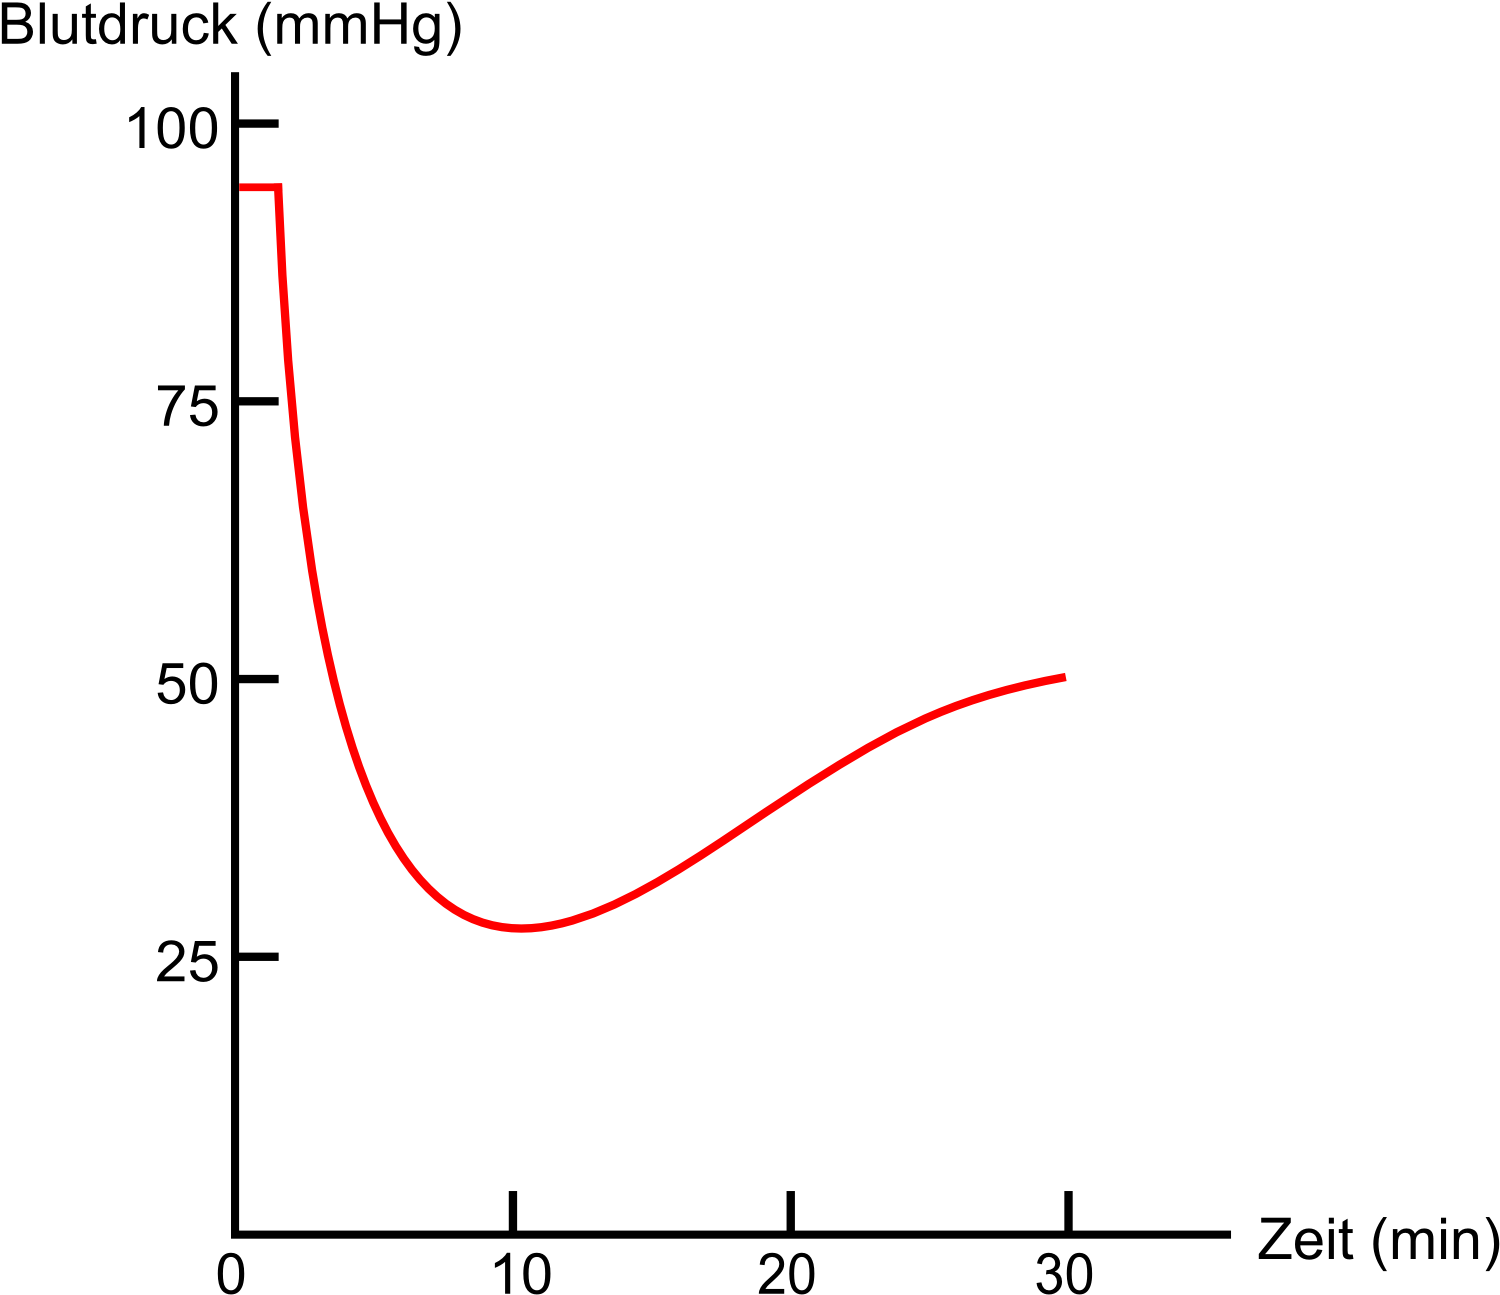 A Red Line On A Black Background